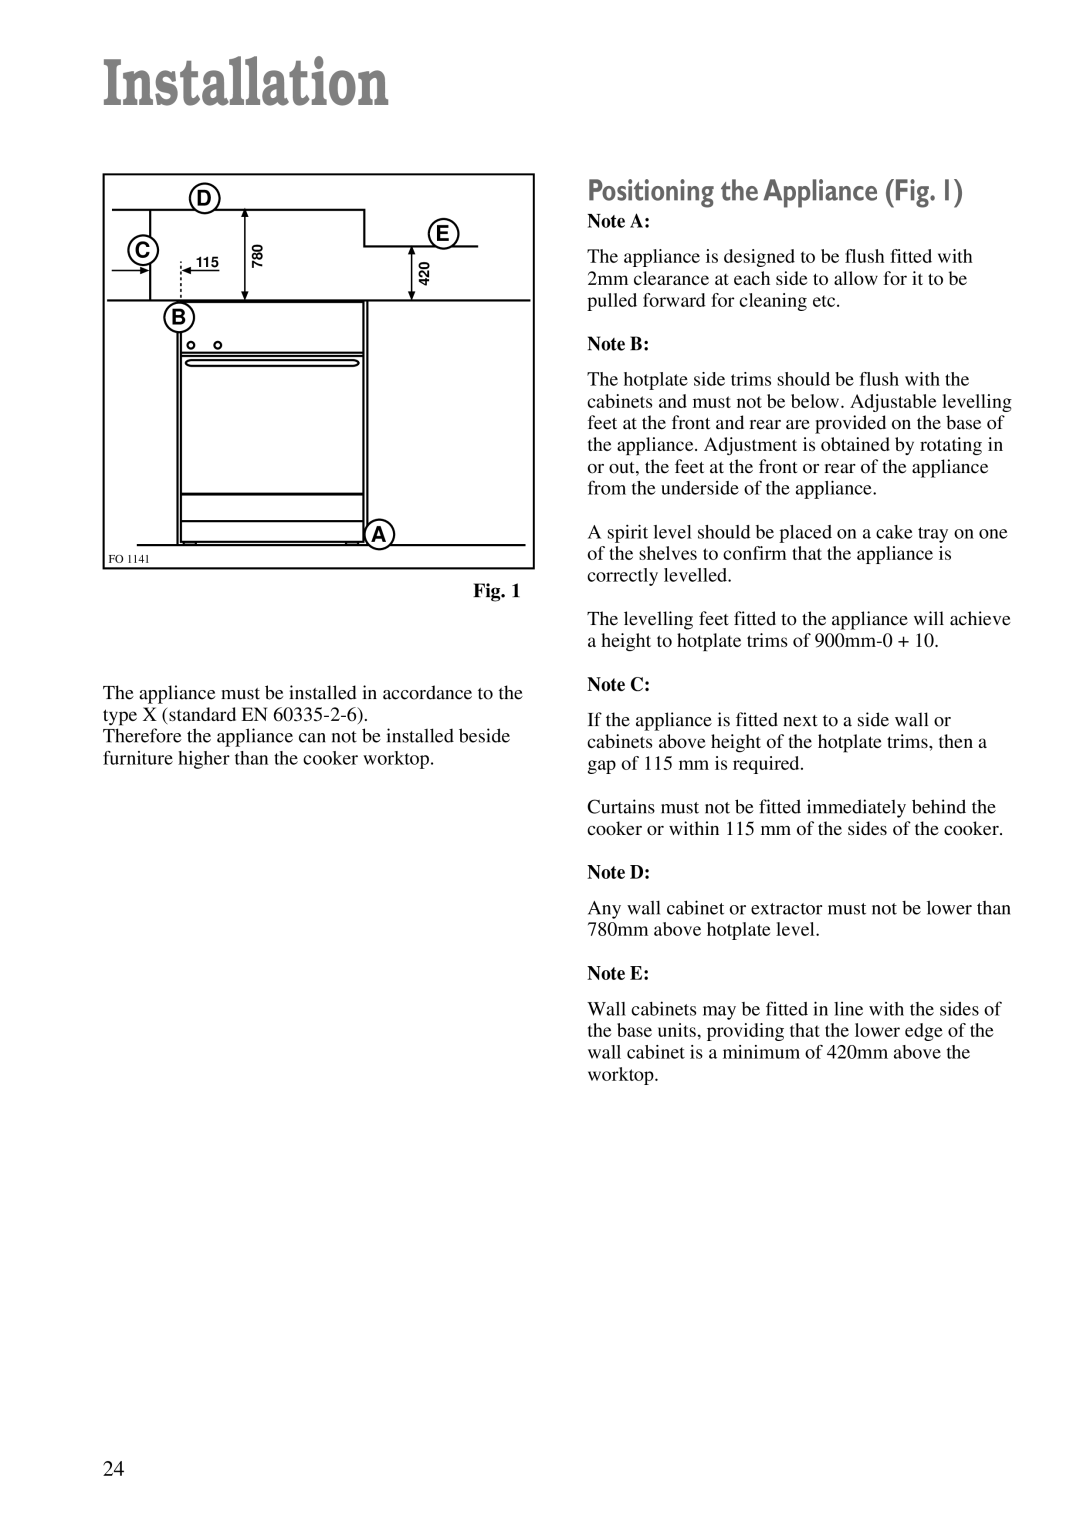 Zanussi ZCM 600 W, ZCM 610 X manual Positioning the Appliance Fig, Note A, Note B, Note C, Note D, Note E, Installation 